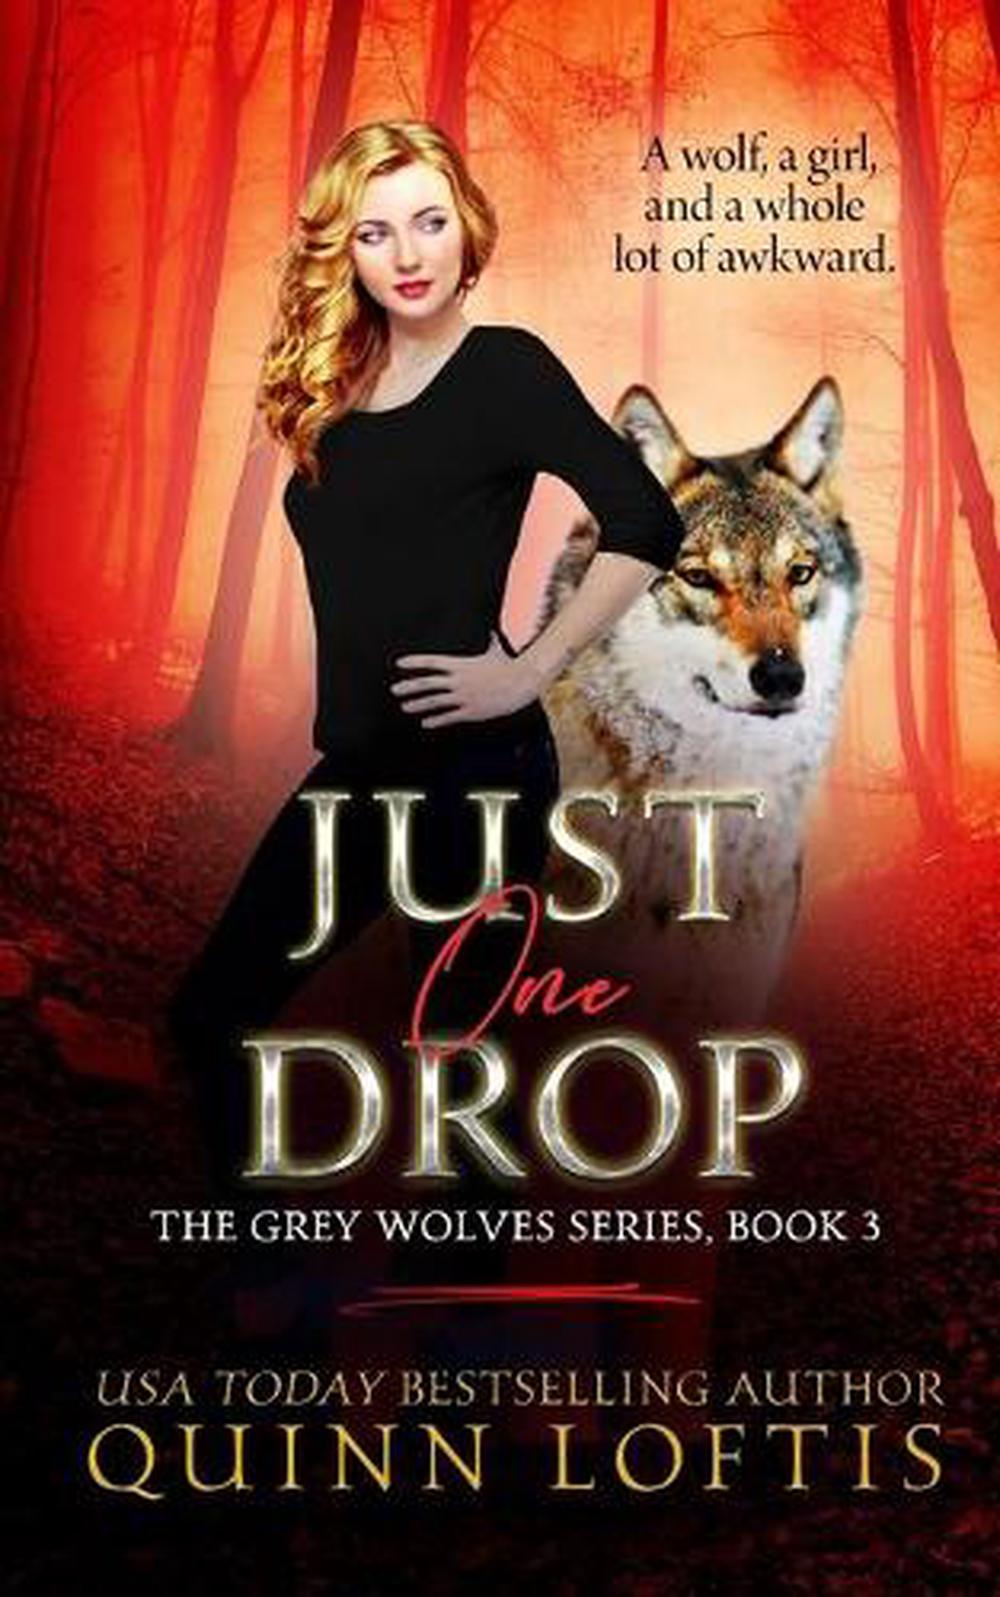 Just One Drop by Quinn Loftis (English) Paperback Book Free Shipping! 9781477522981 eBay